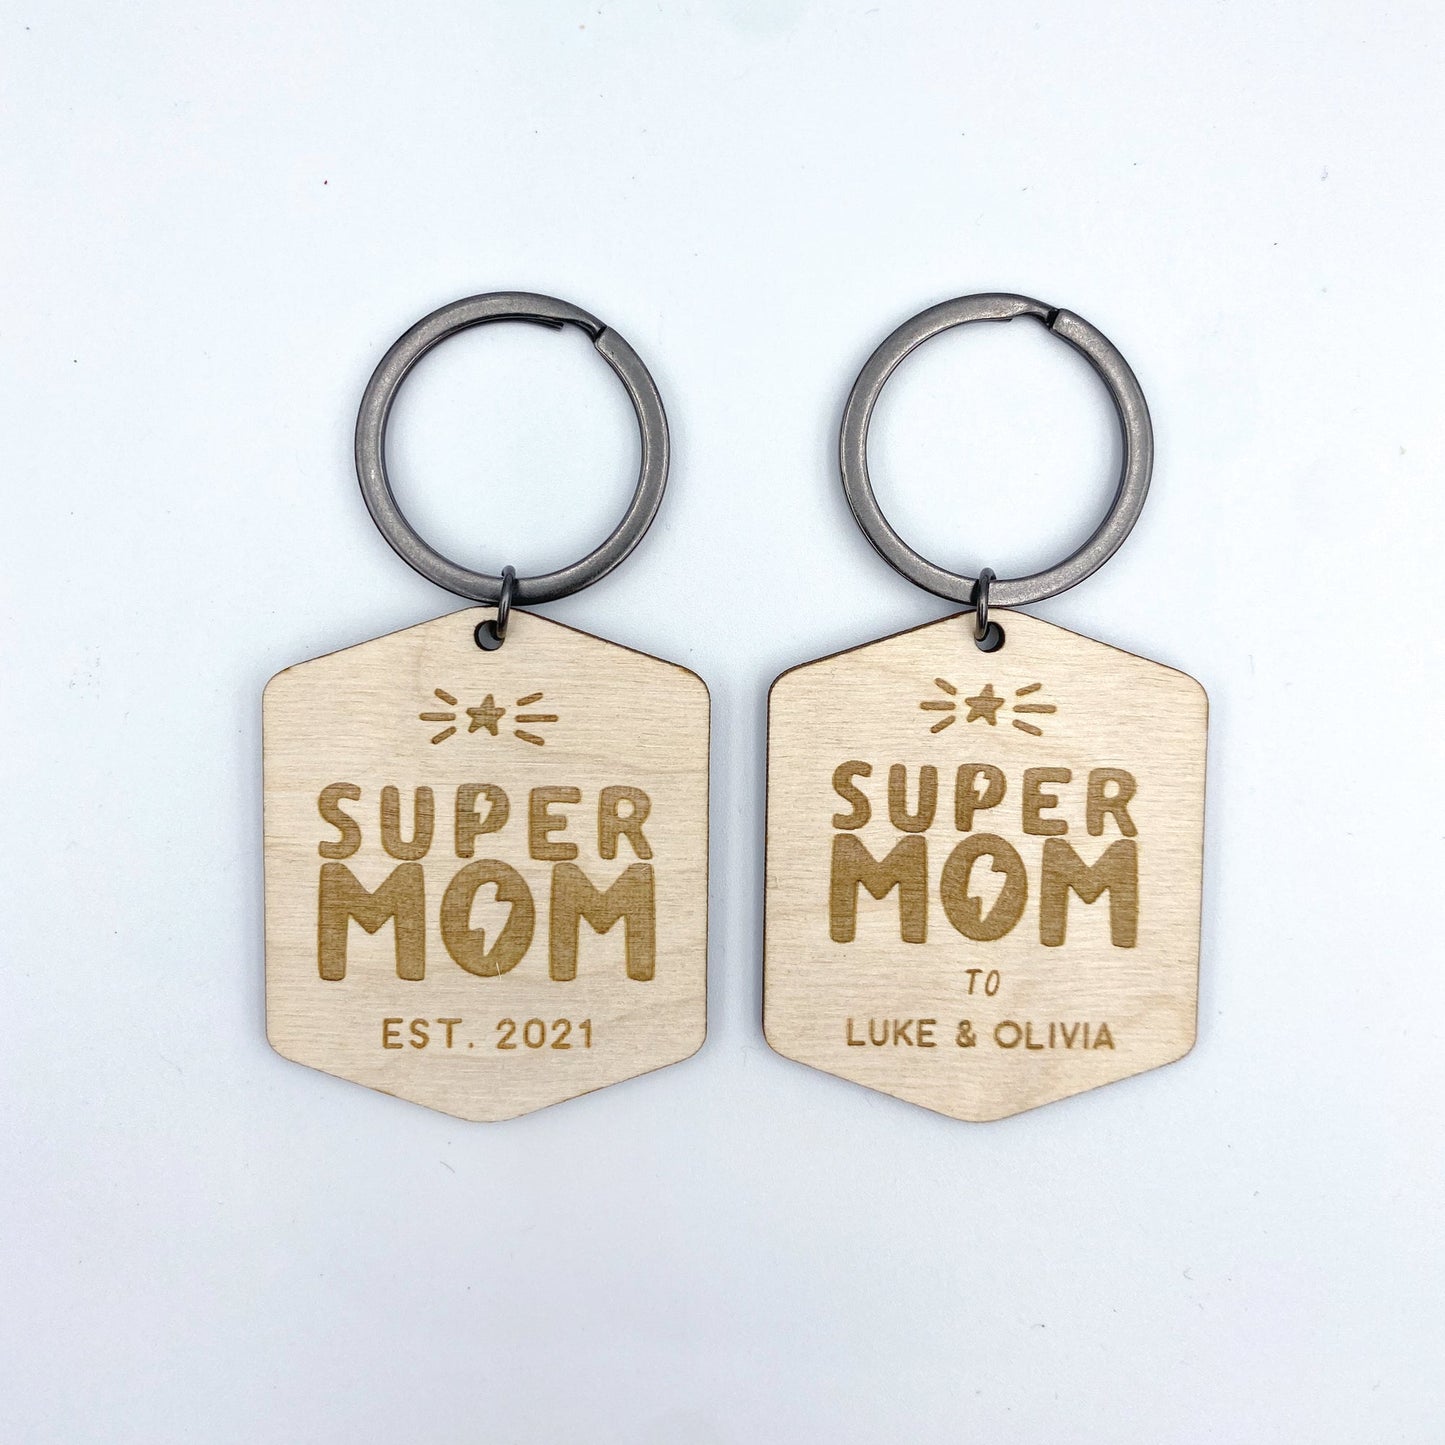 Super Mom Personalized Keychain - Custom Wood Keychains - Gift for Mom - Moon Rock Prints